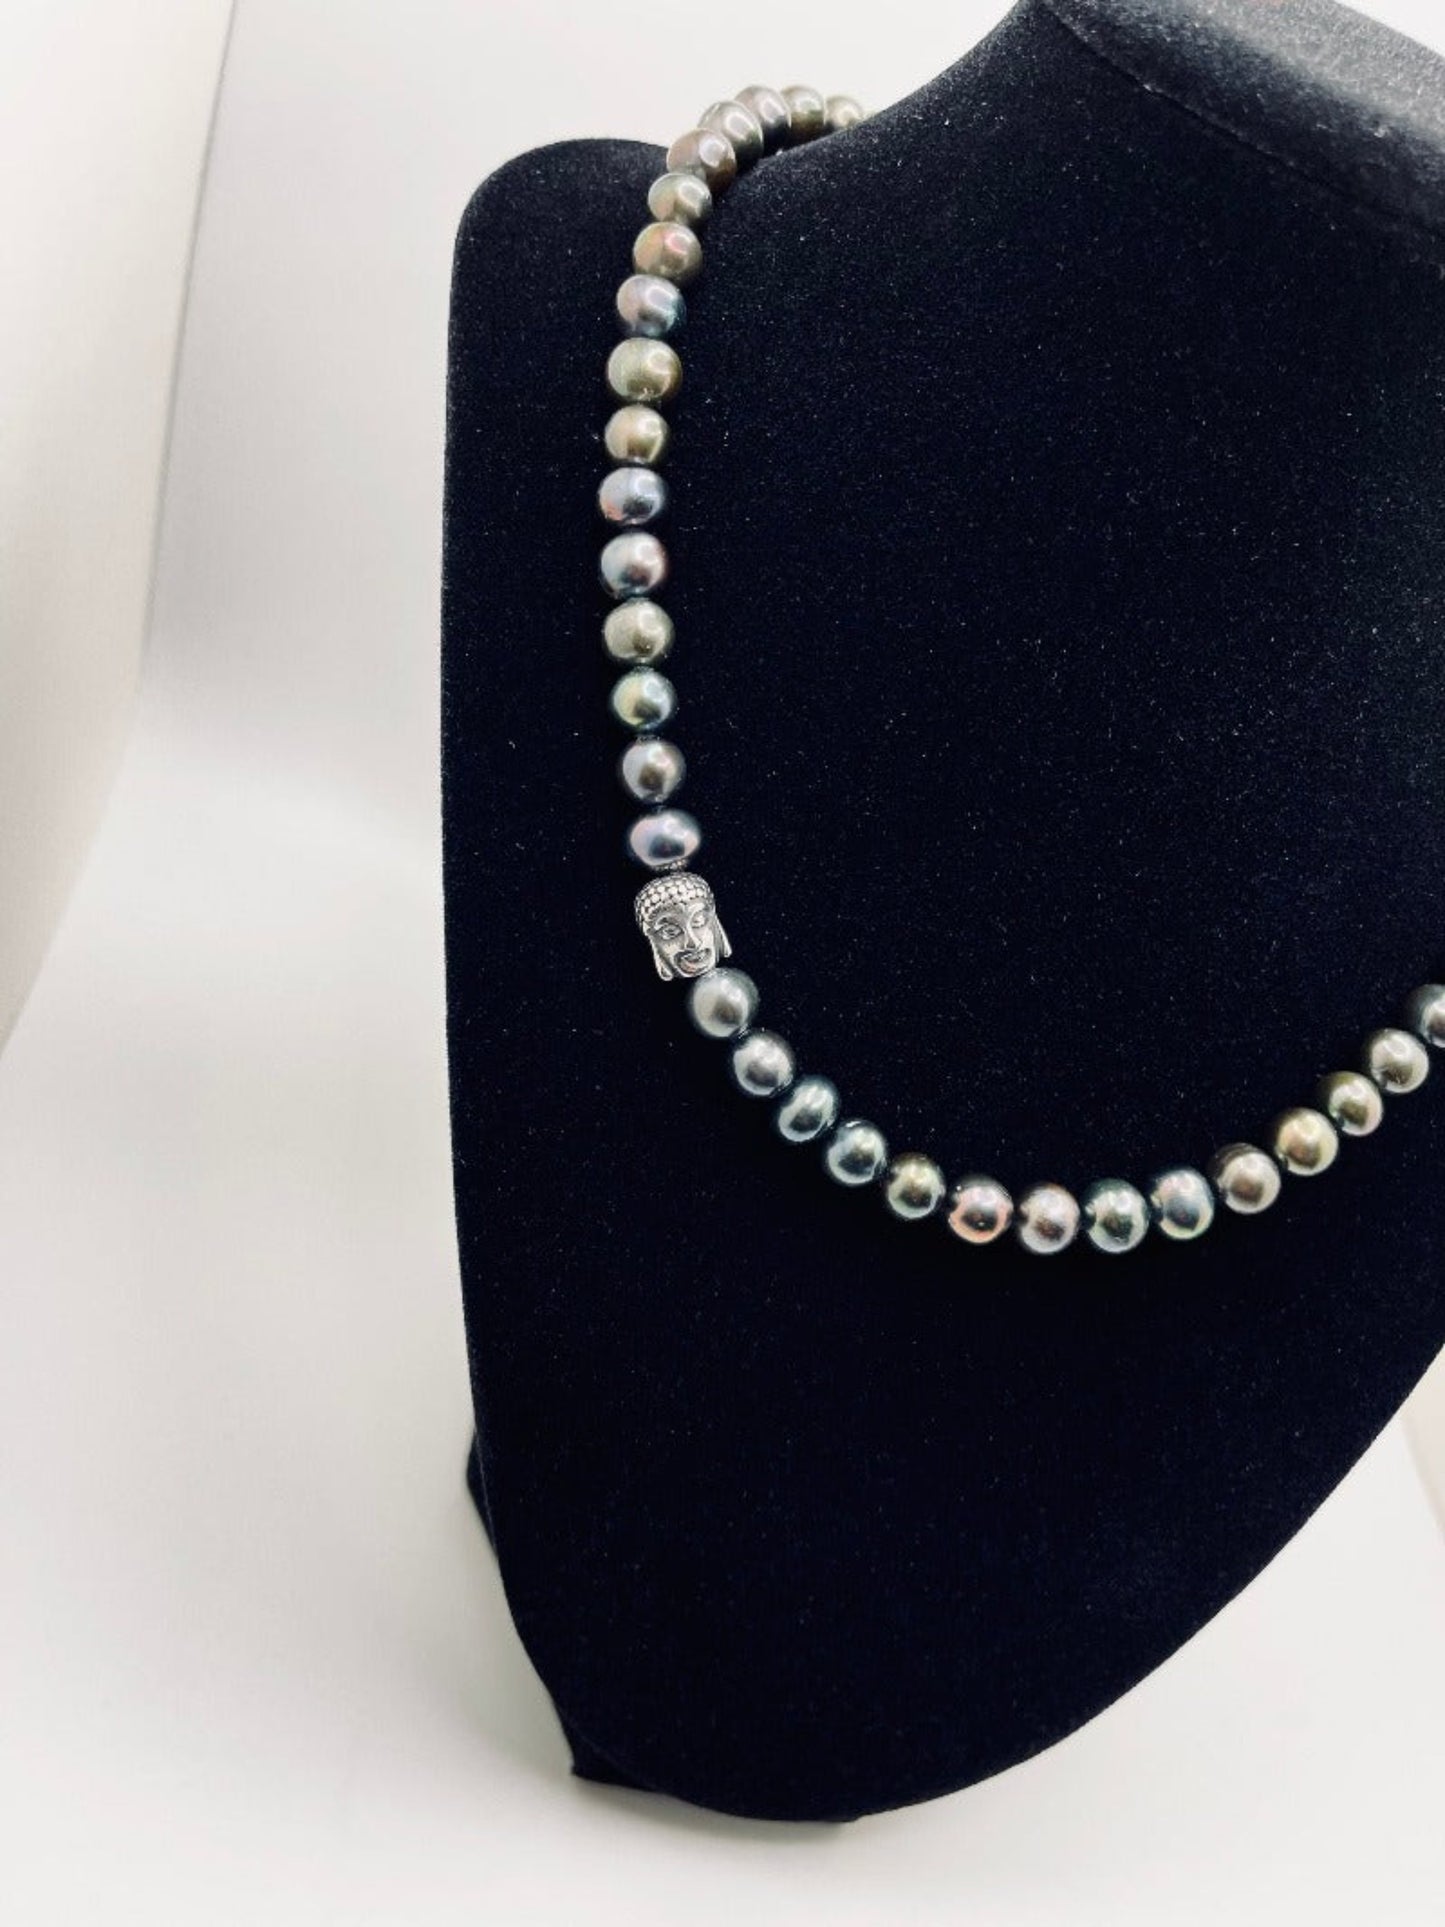 All Black Pearl Necklace